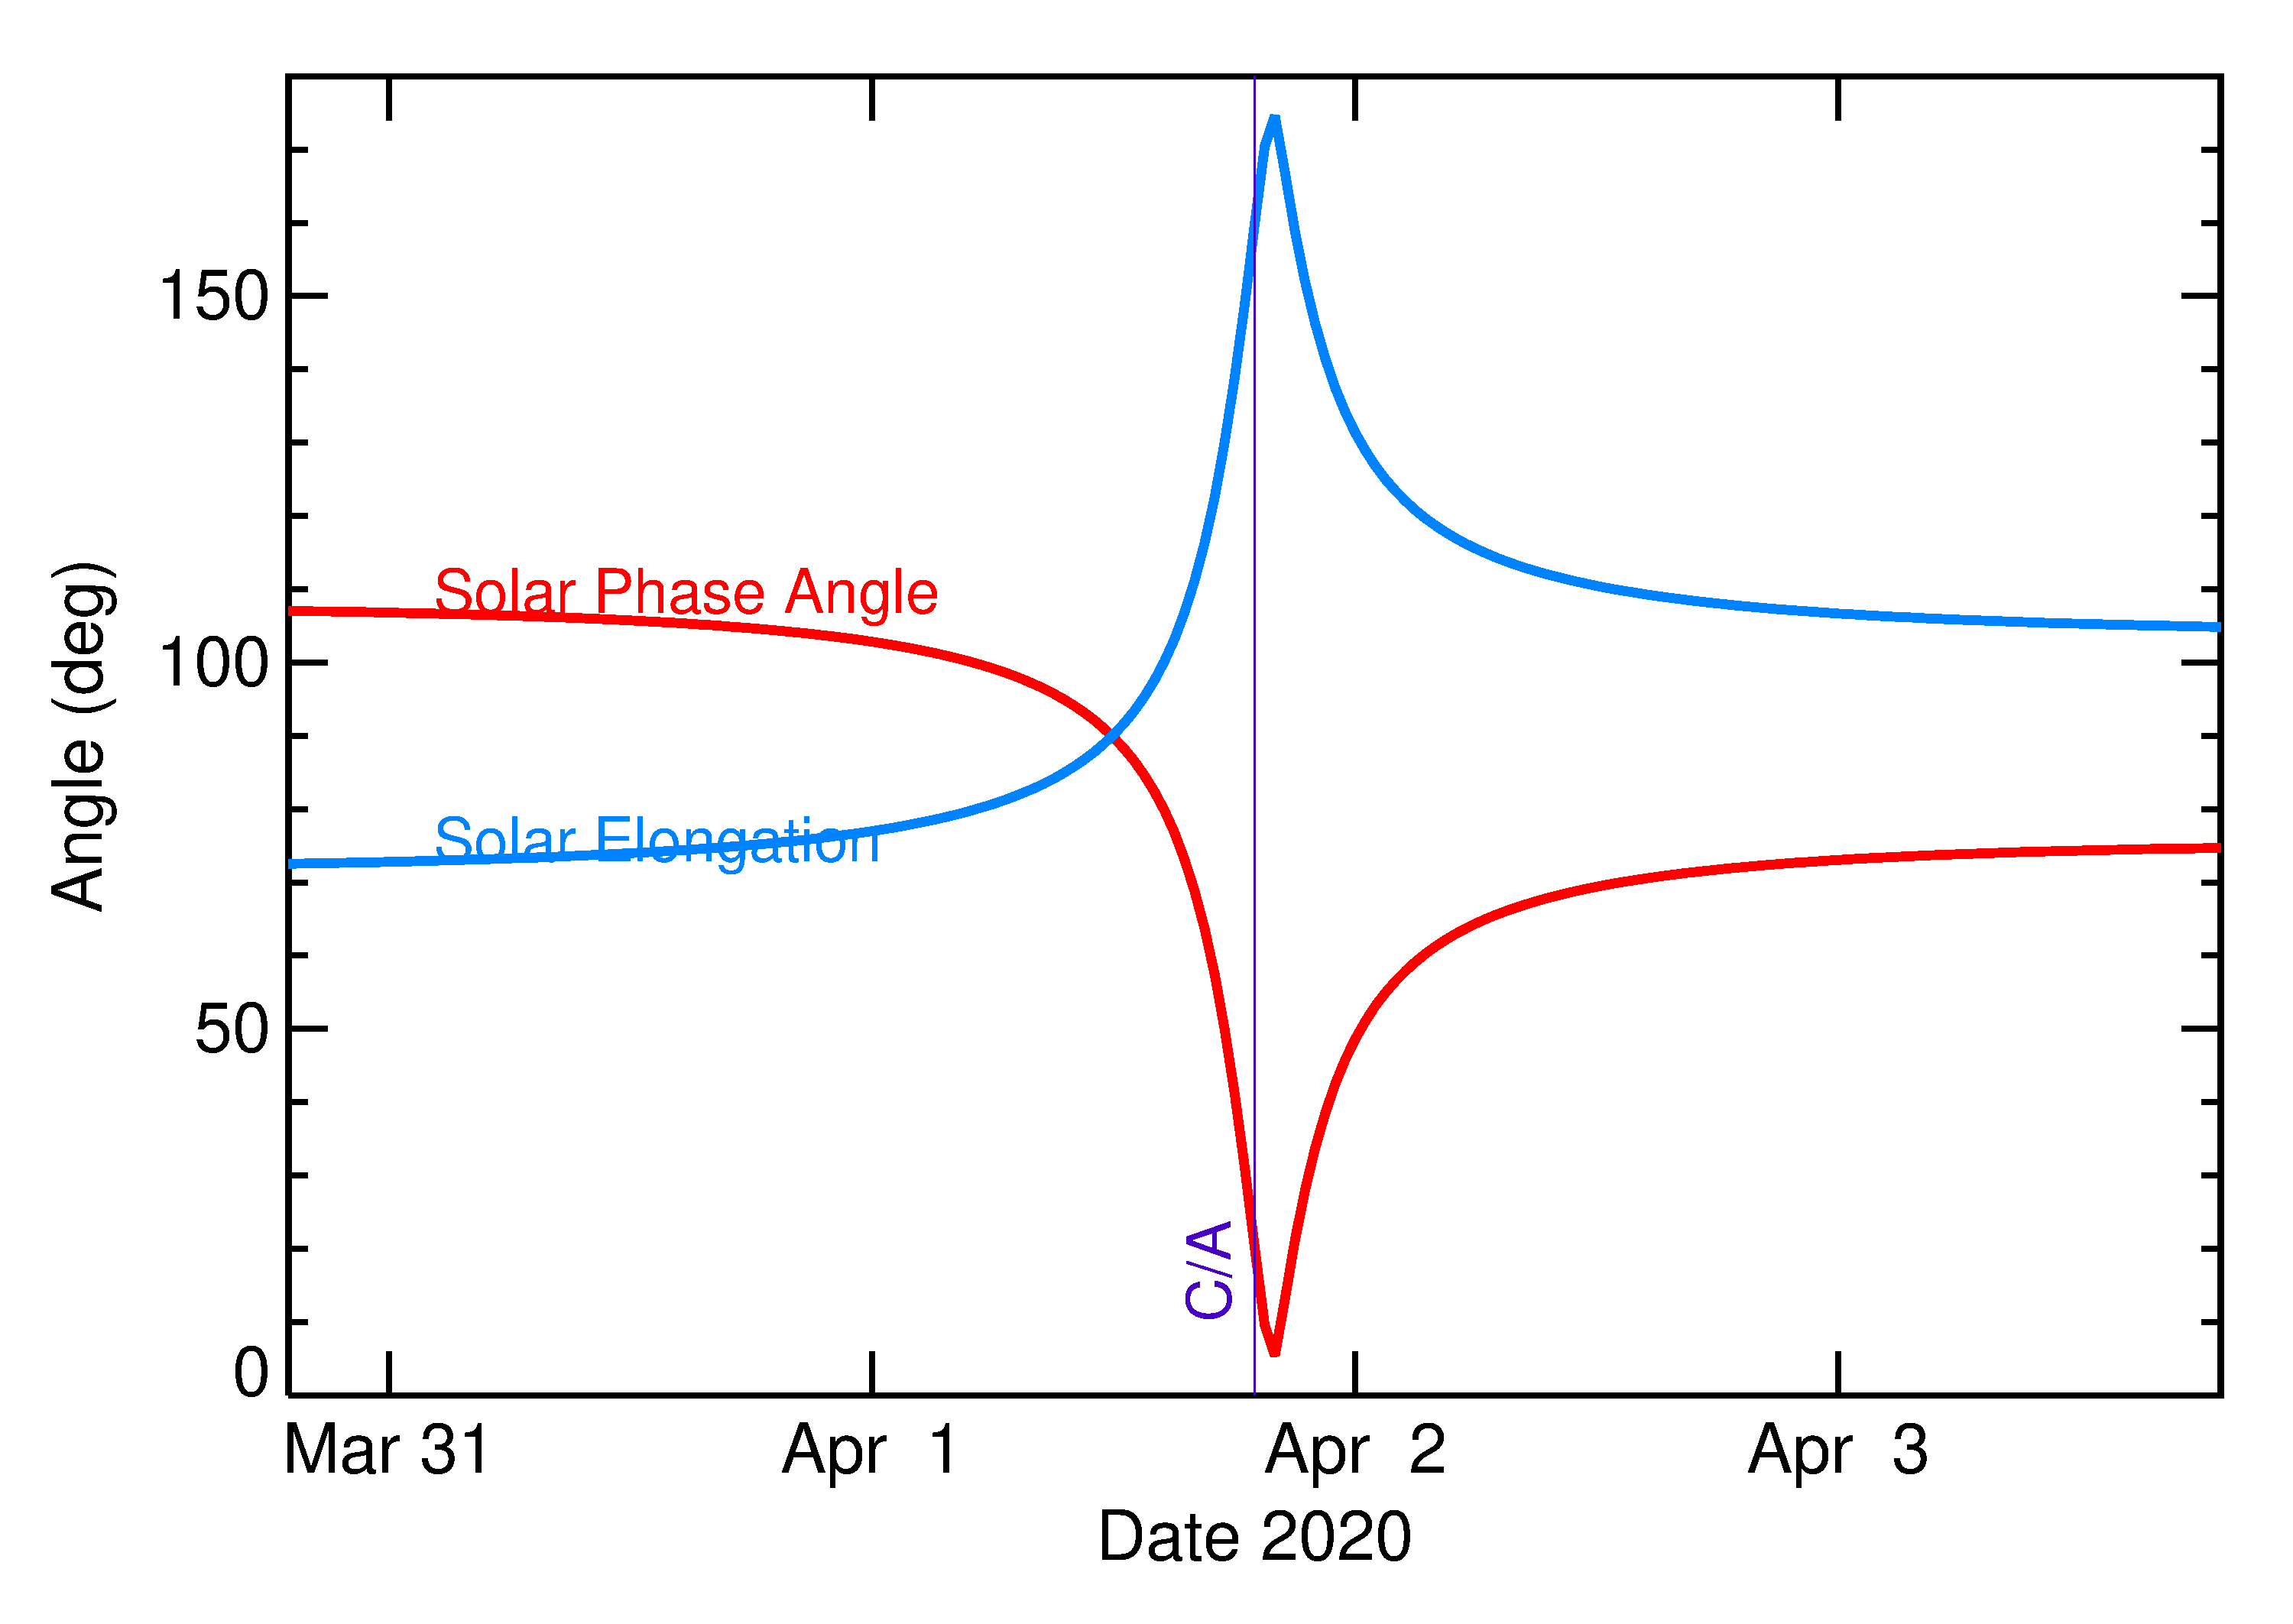 Solar Elongation and Solar Phase Angle of 2020 GO1 in the days around closest approach